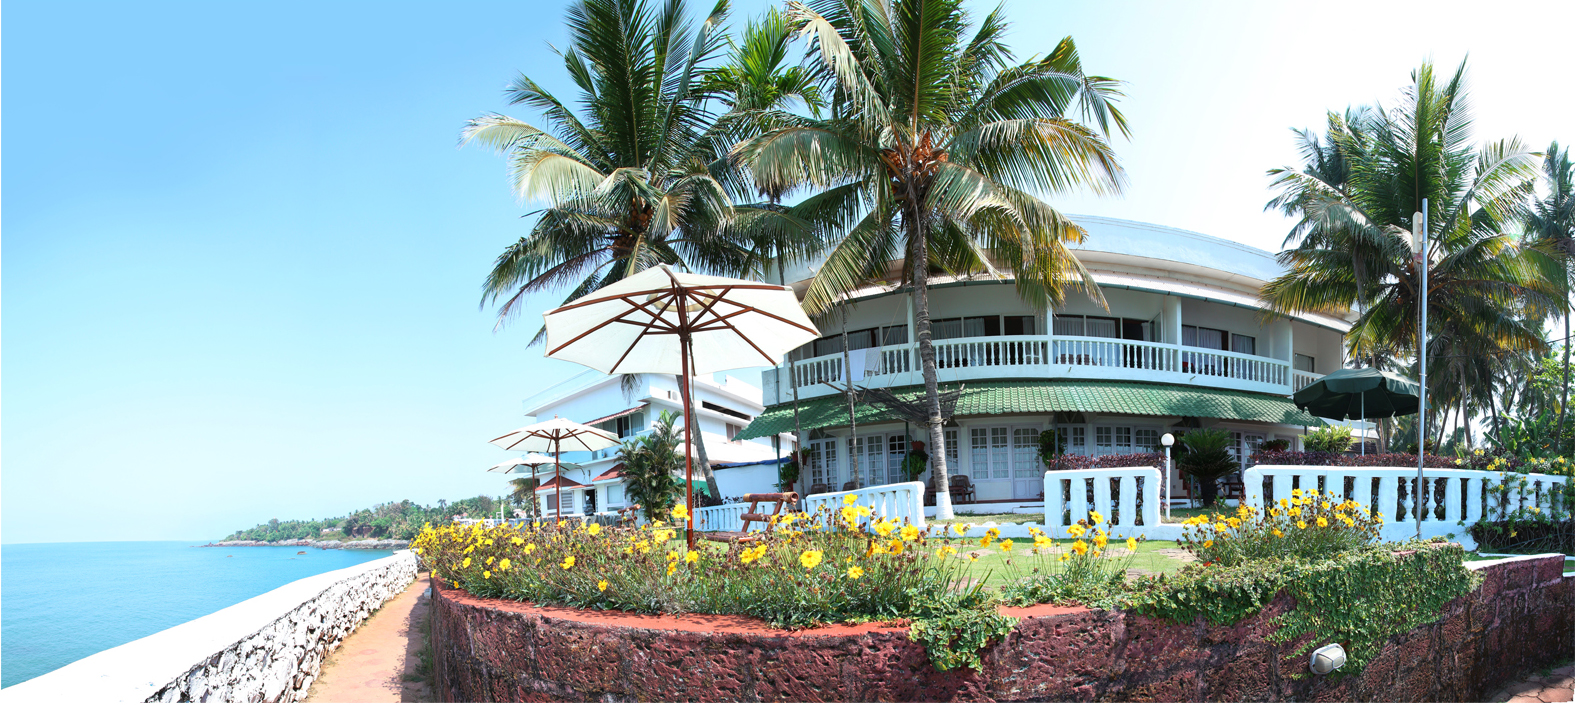 Picture of a place: Mascot Beach Resort